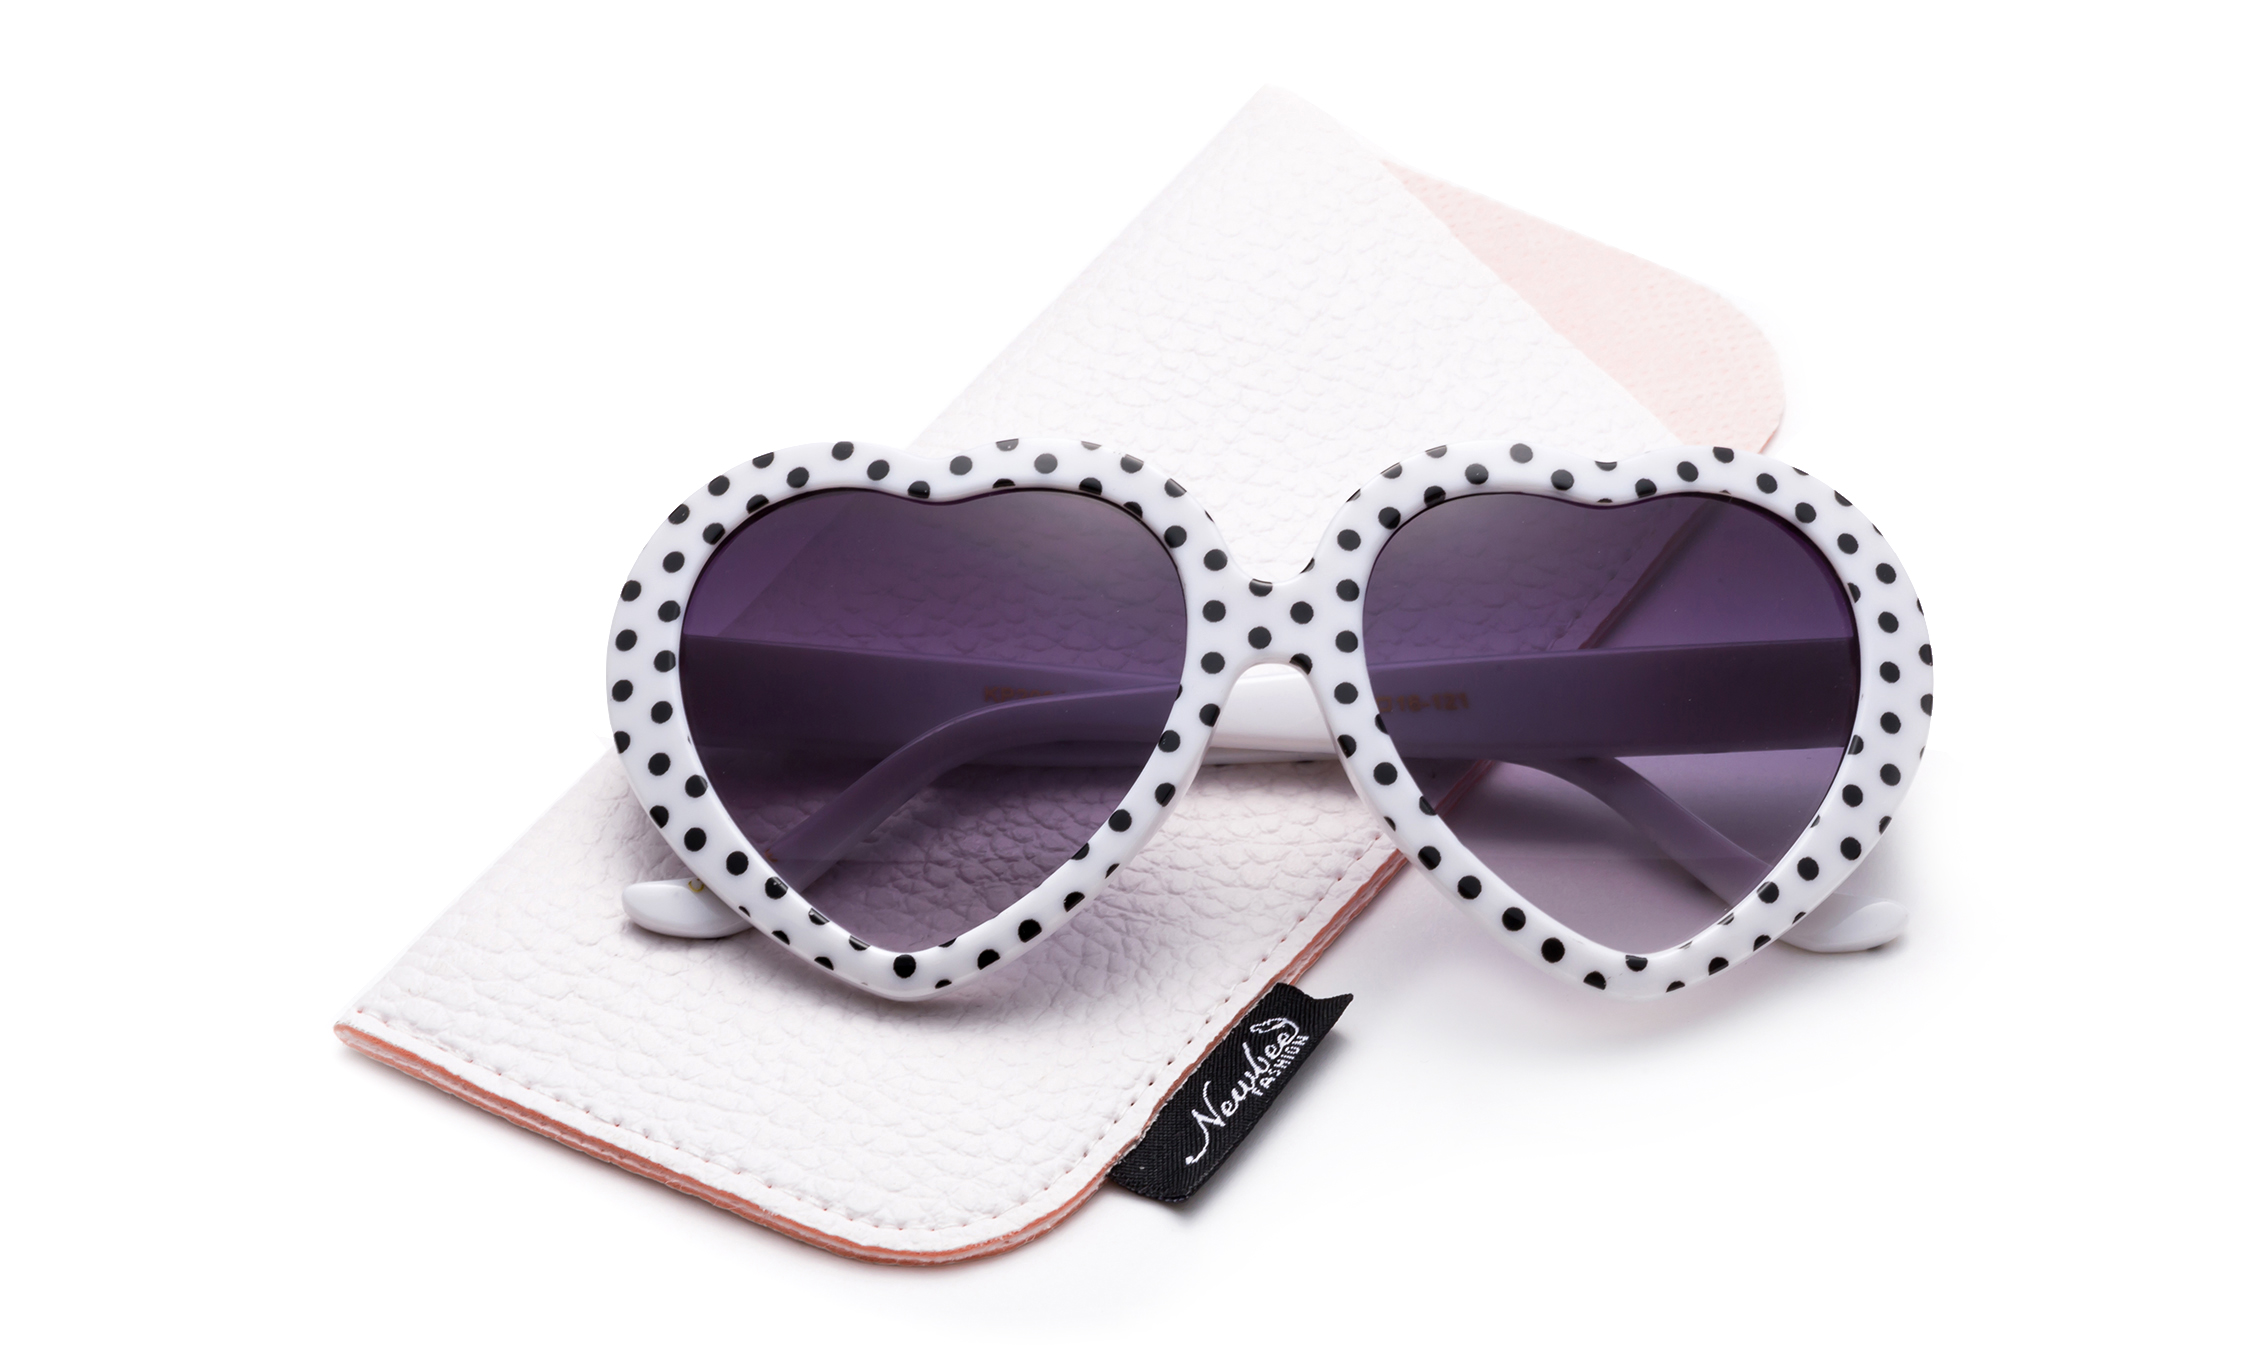 Newbee Fashion-Kids Heart Sunglasses Girls Heart Shaped Sunglasses Polka Dots Cute Vintage Look UV Protection w/Carrying Pouch - image 1 of 3